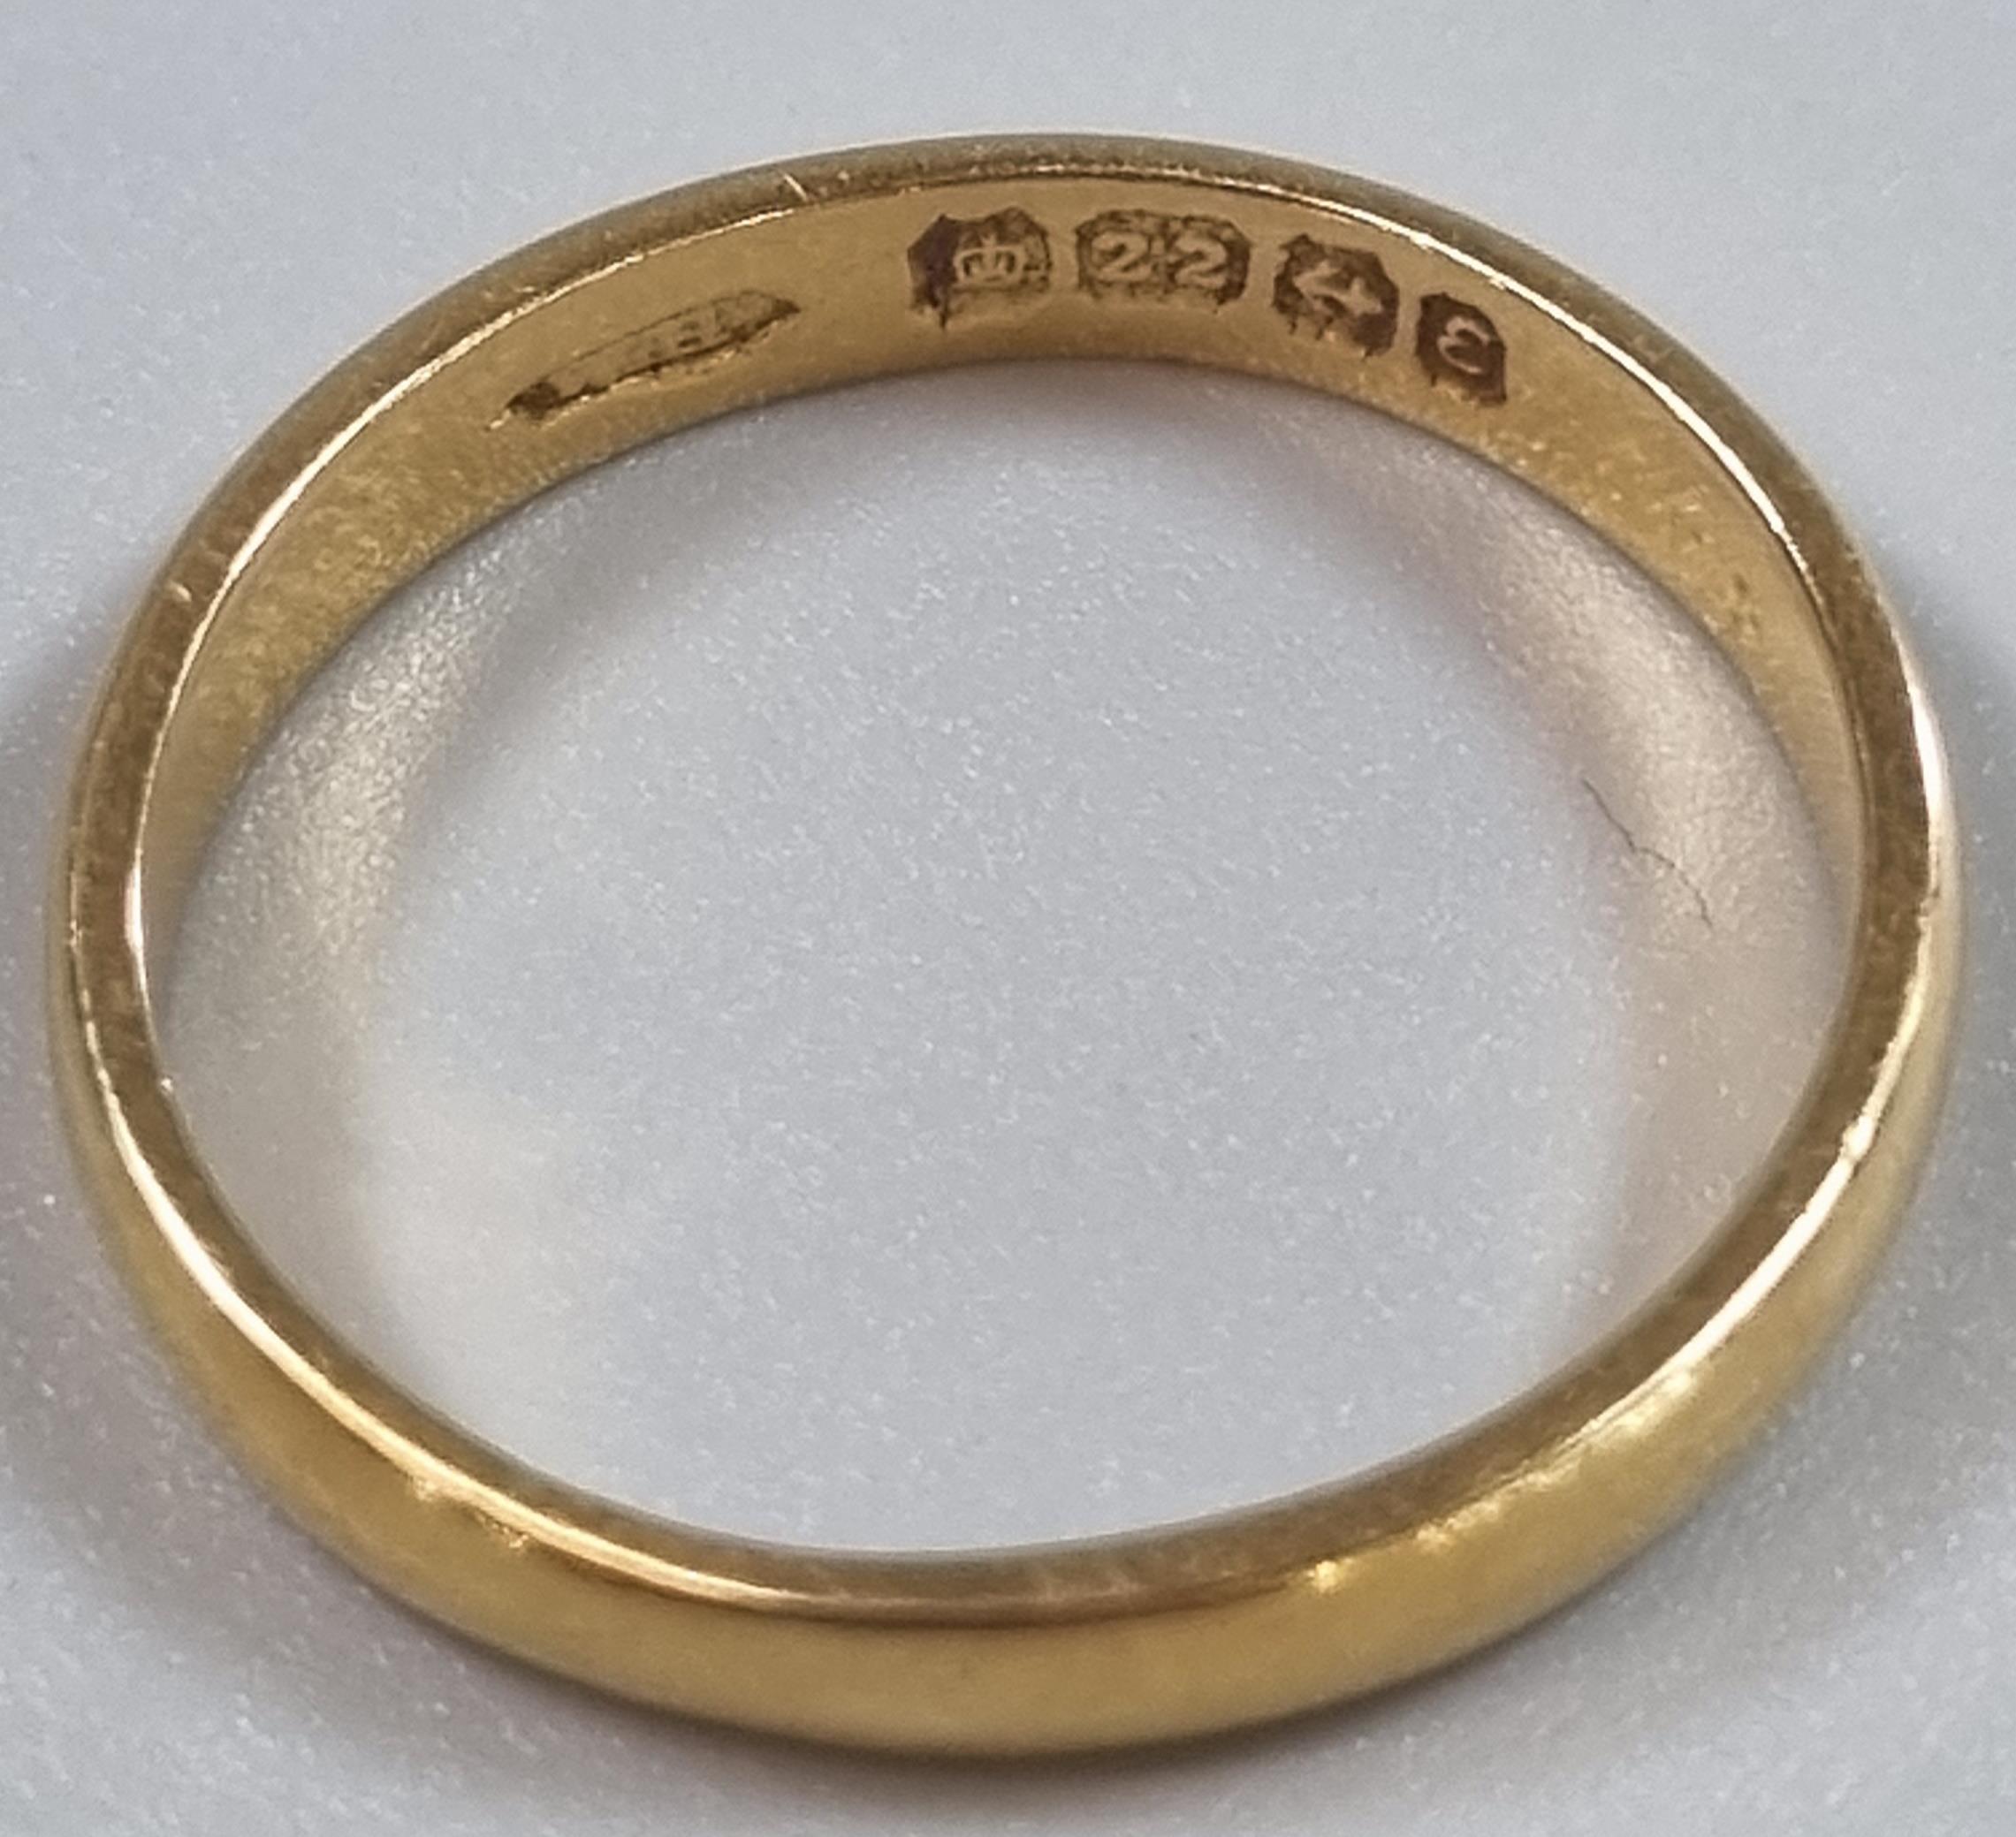 22ct gold wedding band. 3.2g approx. Size M. (B.P. 21% + VAT) - Image 3 of 4